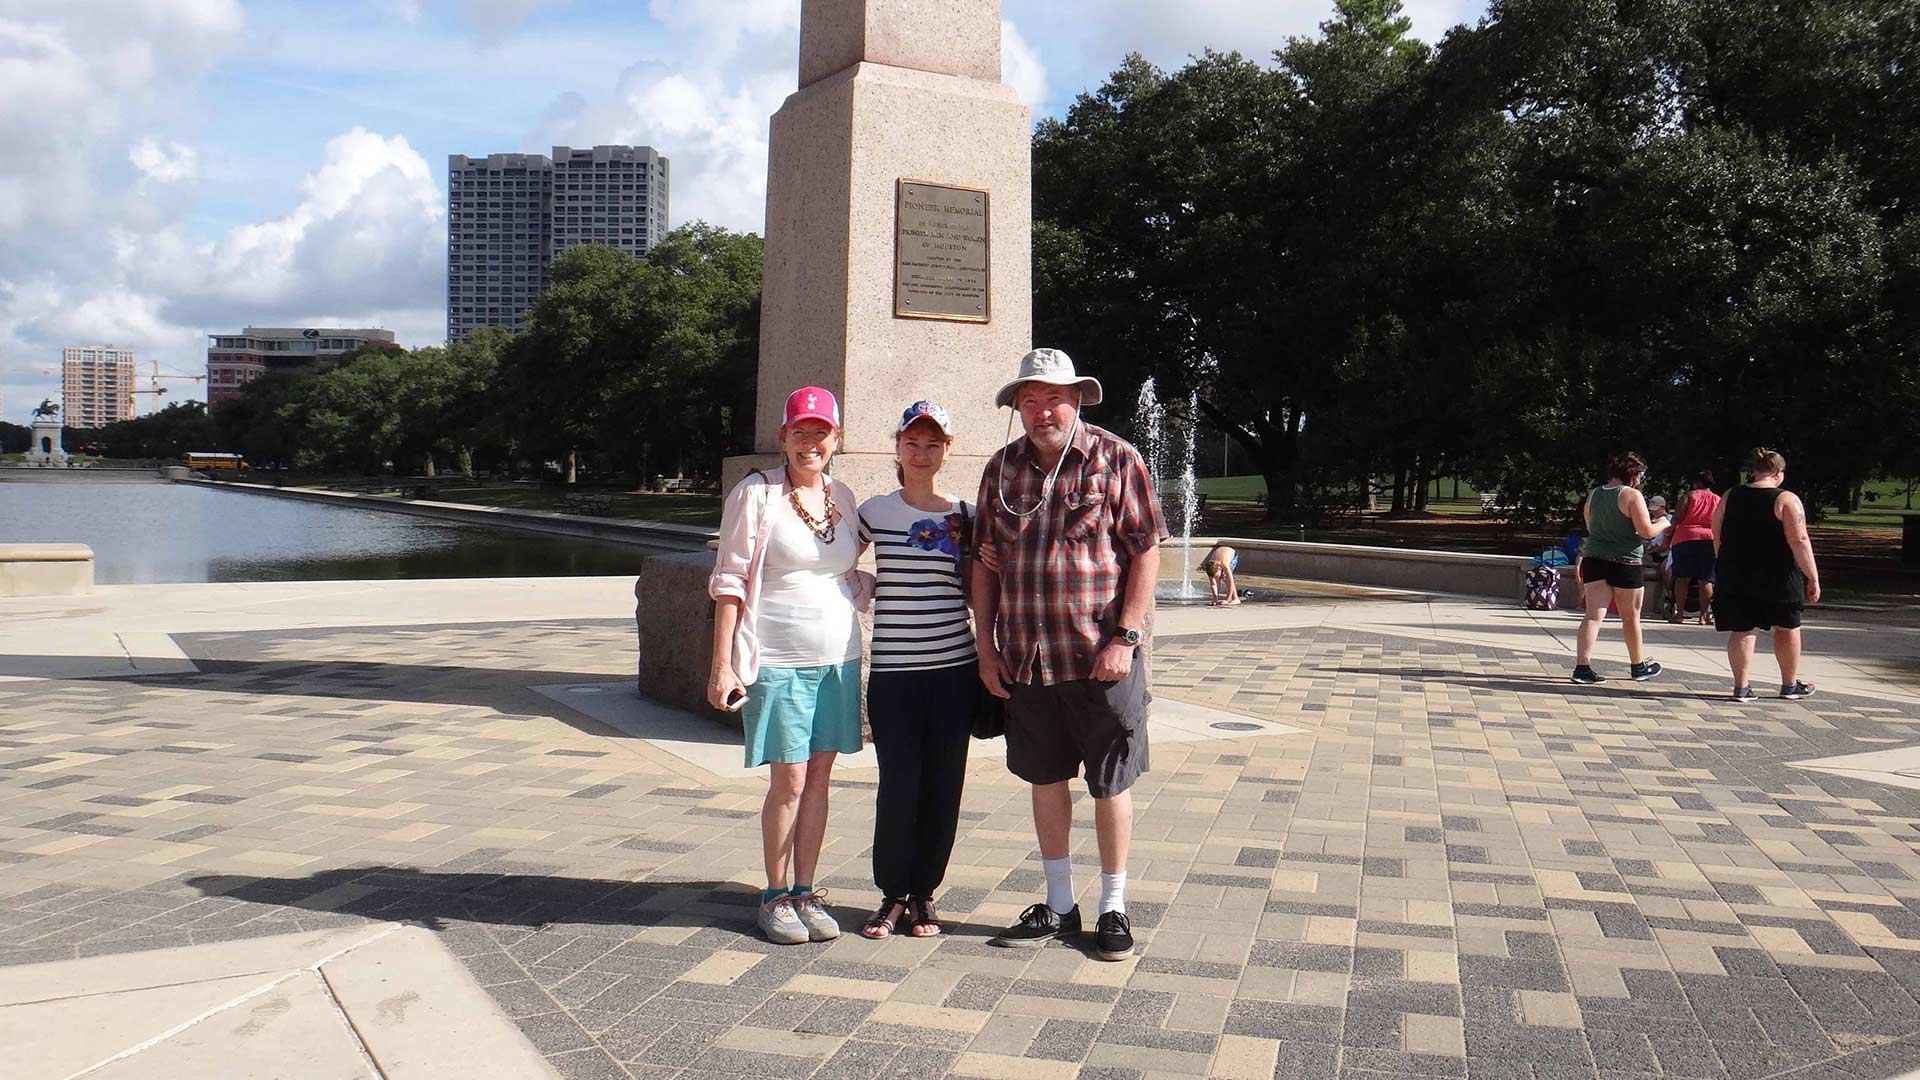 Three smiling people pose for a photo together in Houston.